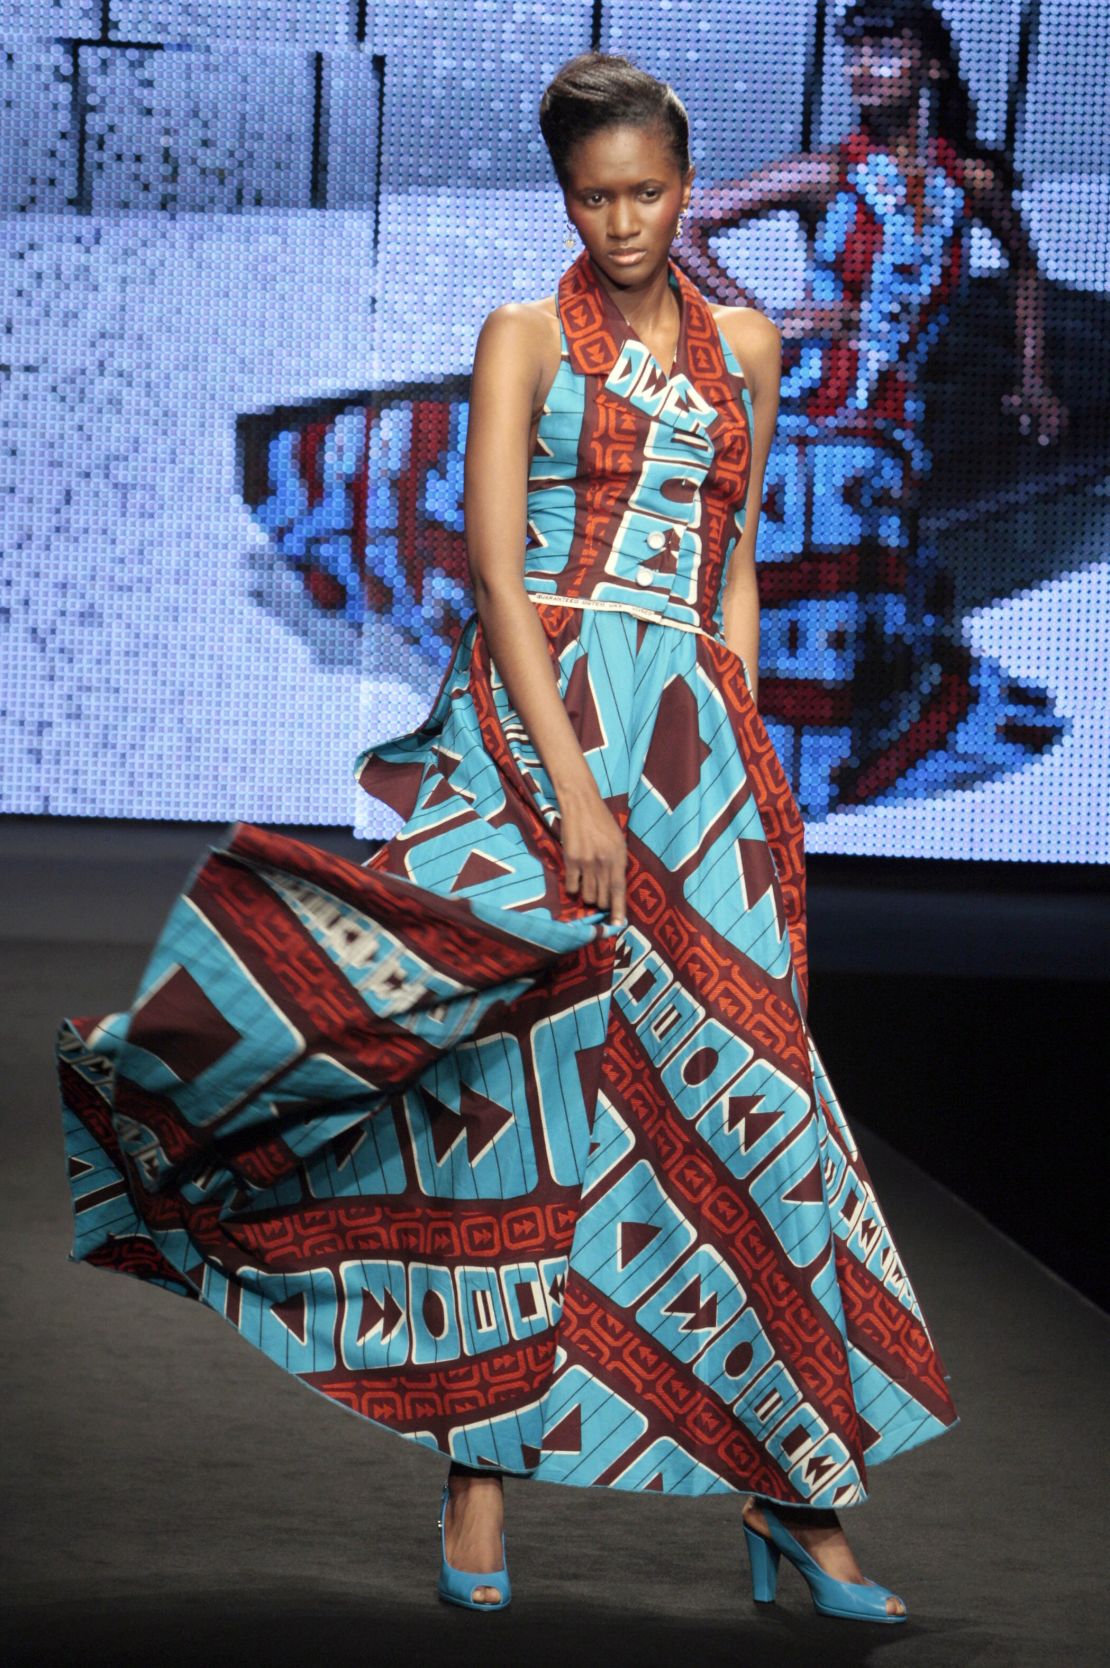 A model at the Vlisco beat collection fashion show in Paris.